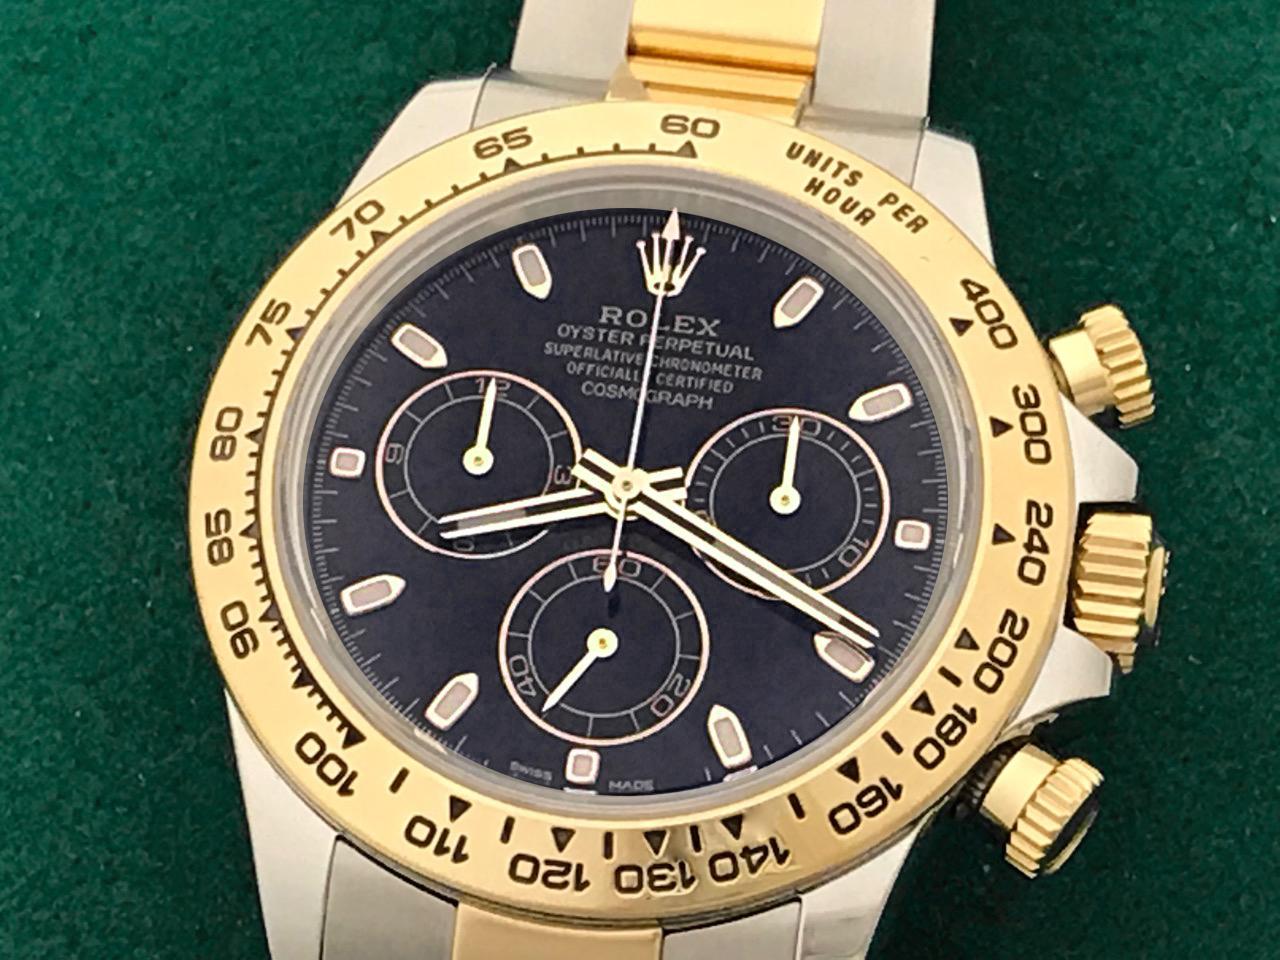 Rolex Men's Daytona Model 116503 at a great price.  Automatic Winding Oyster Perpetual Cosmograph, black dial with luminous gold hour markers.  Stainless steel case with 18k yellow gold bezel, Stainless Steel and 18k Yellow Gold Oyster bracelet with